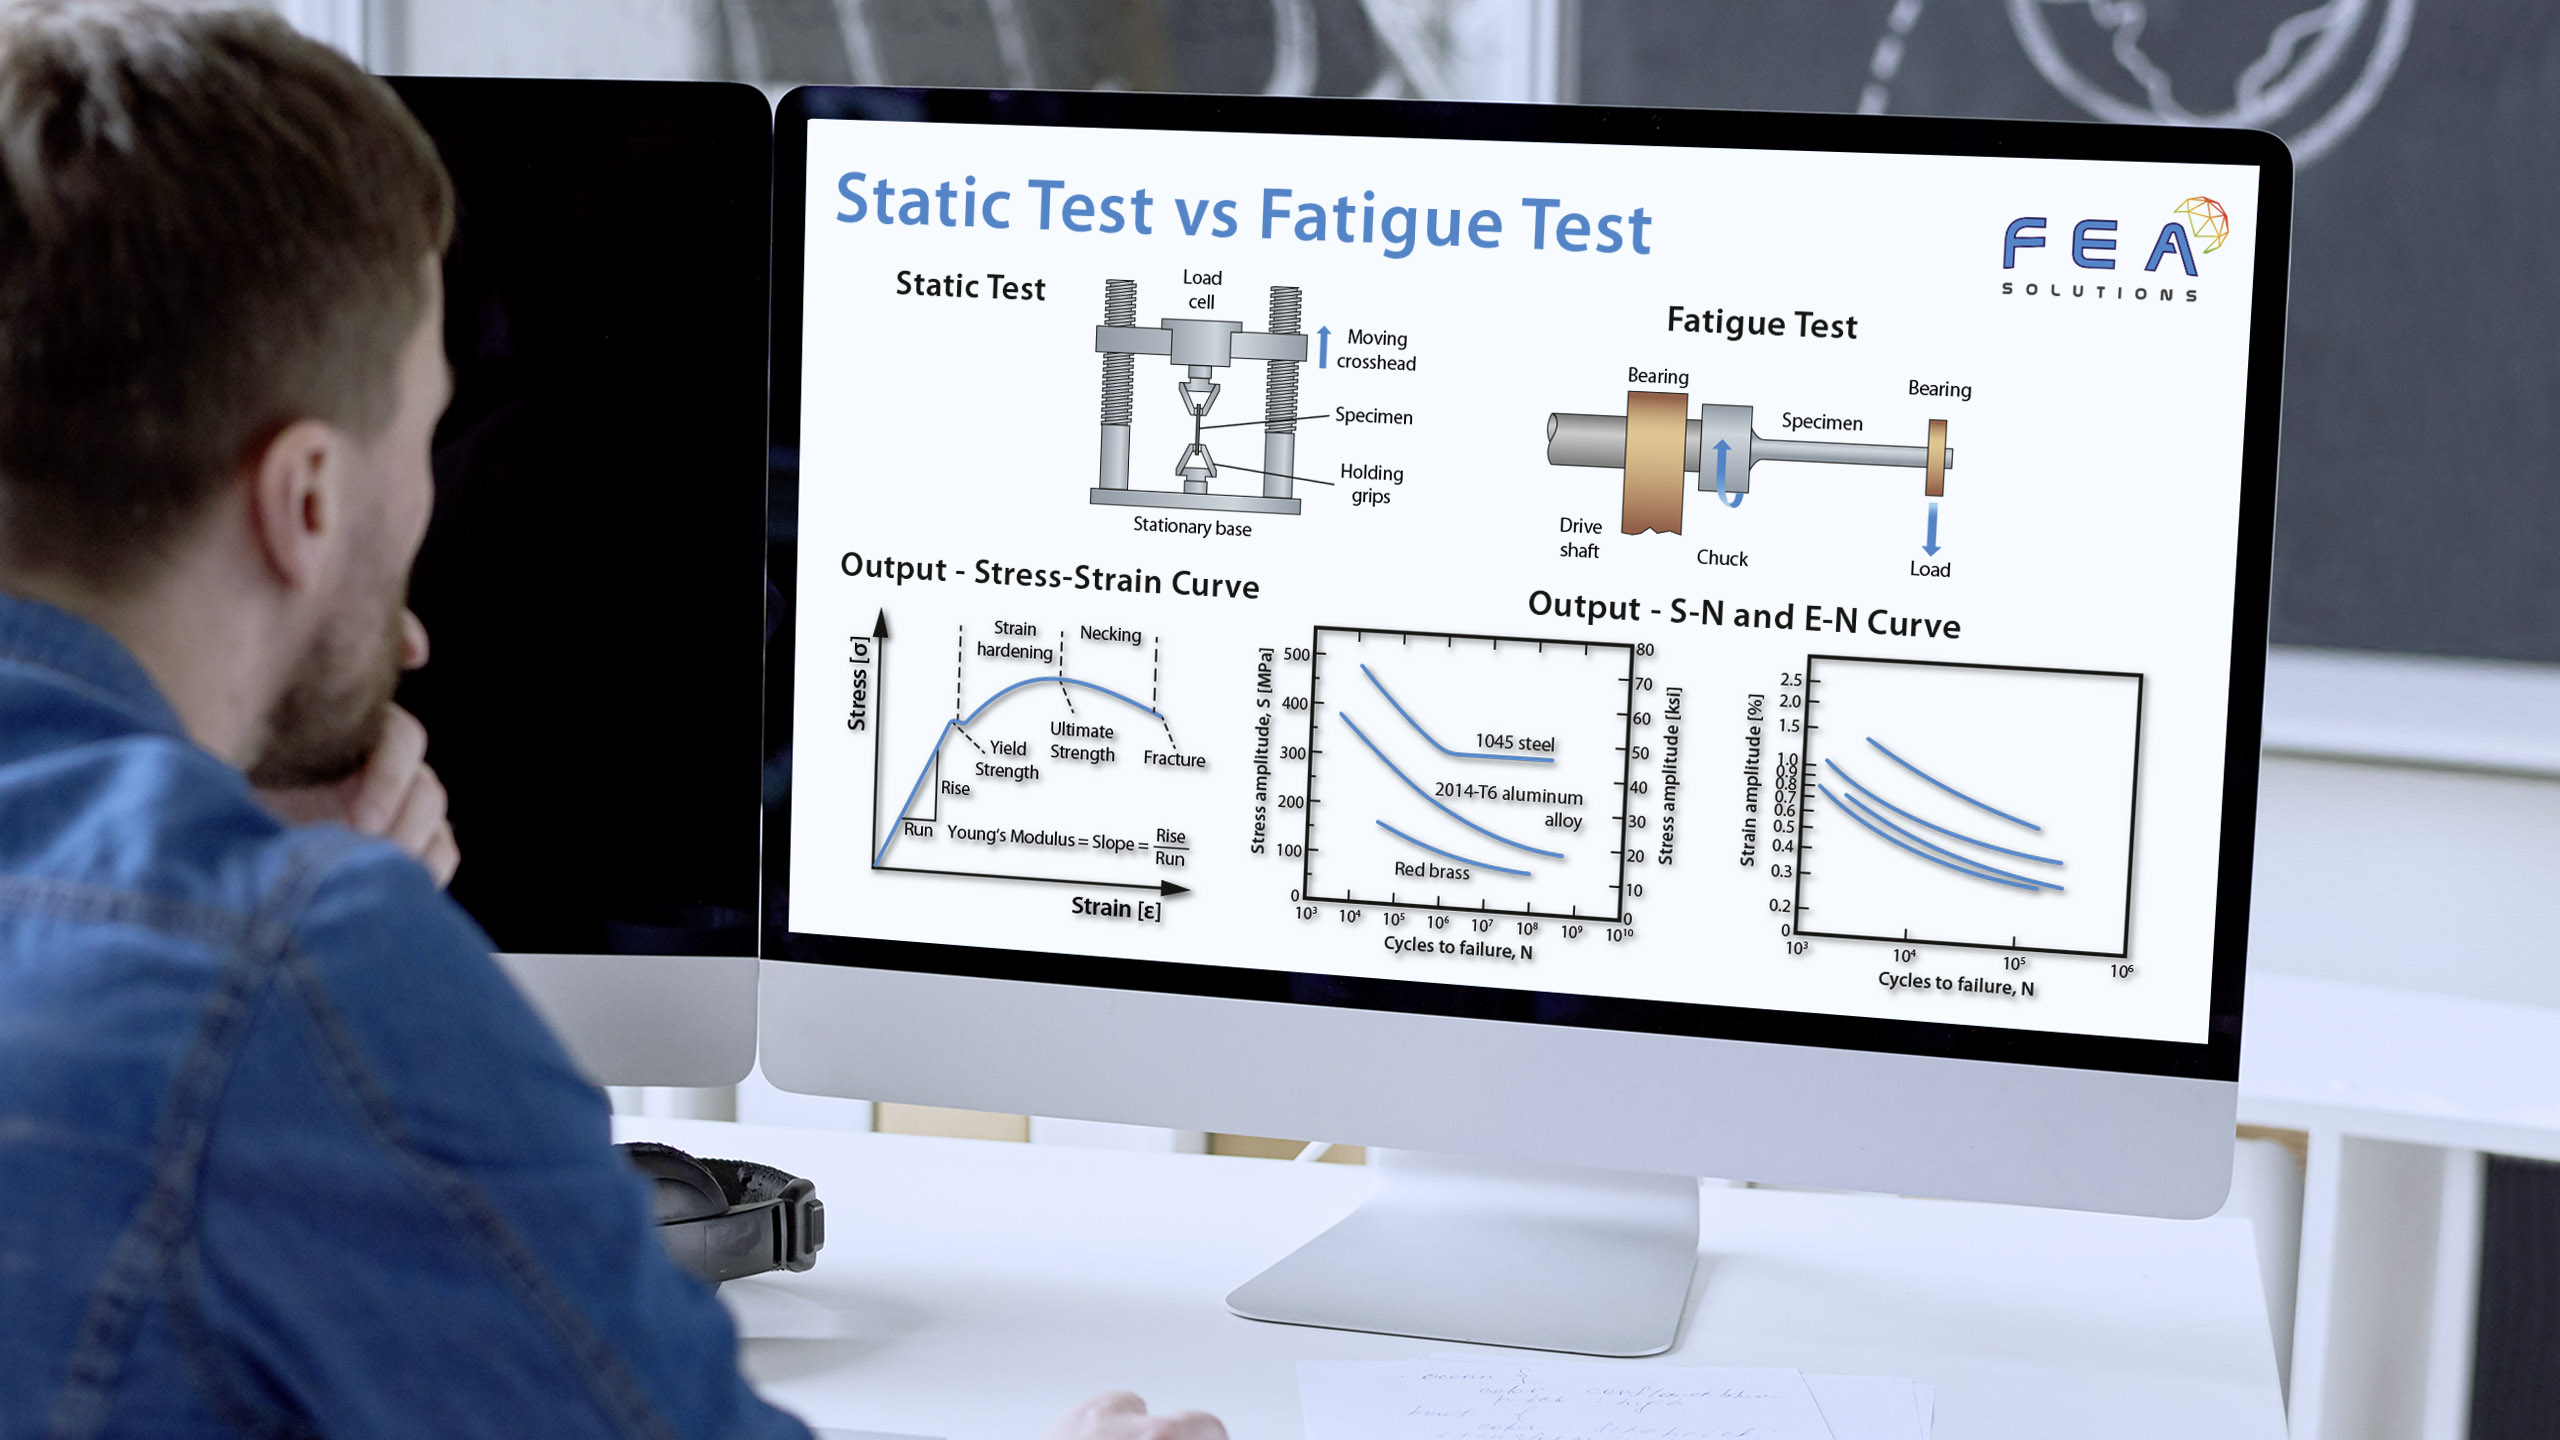 static test vs fatigue test infographic